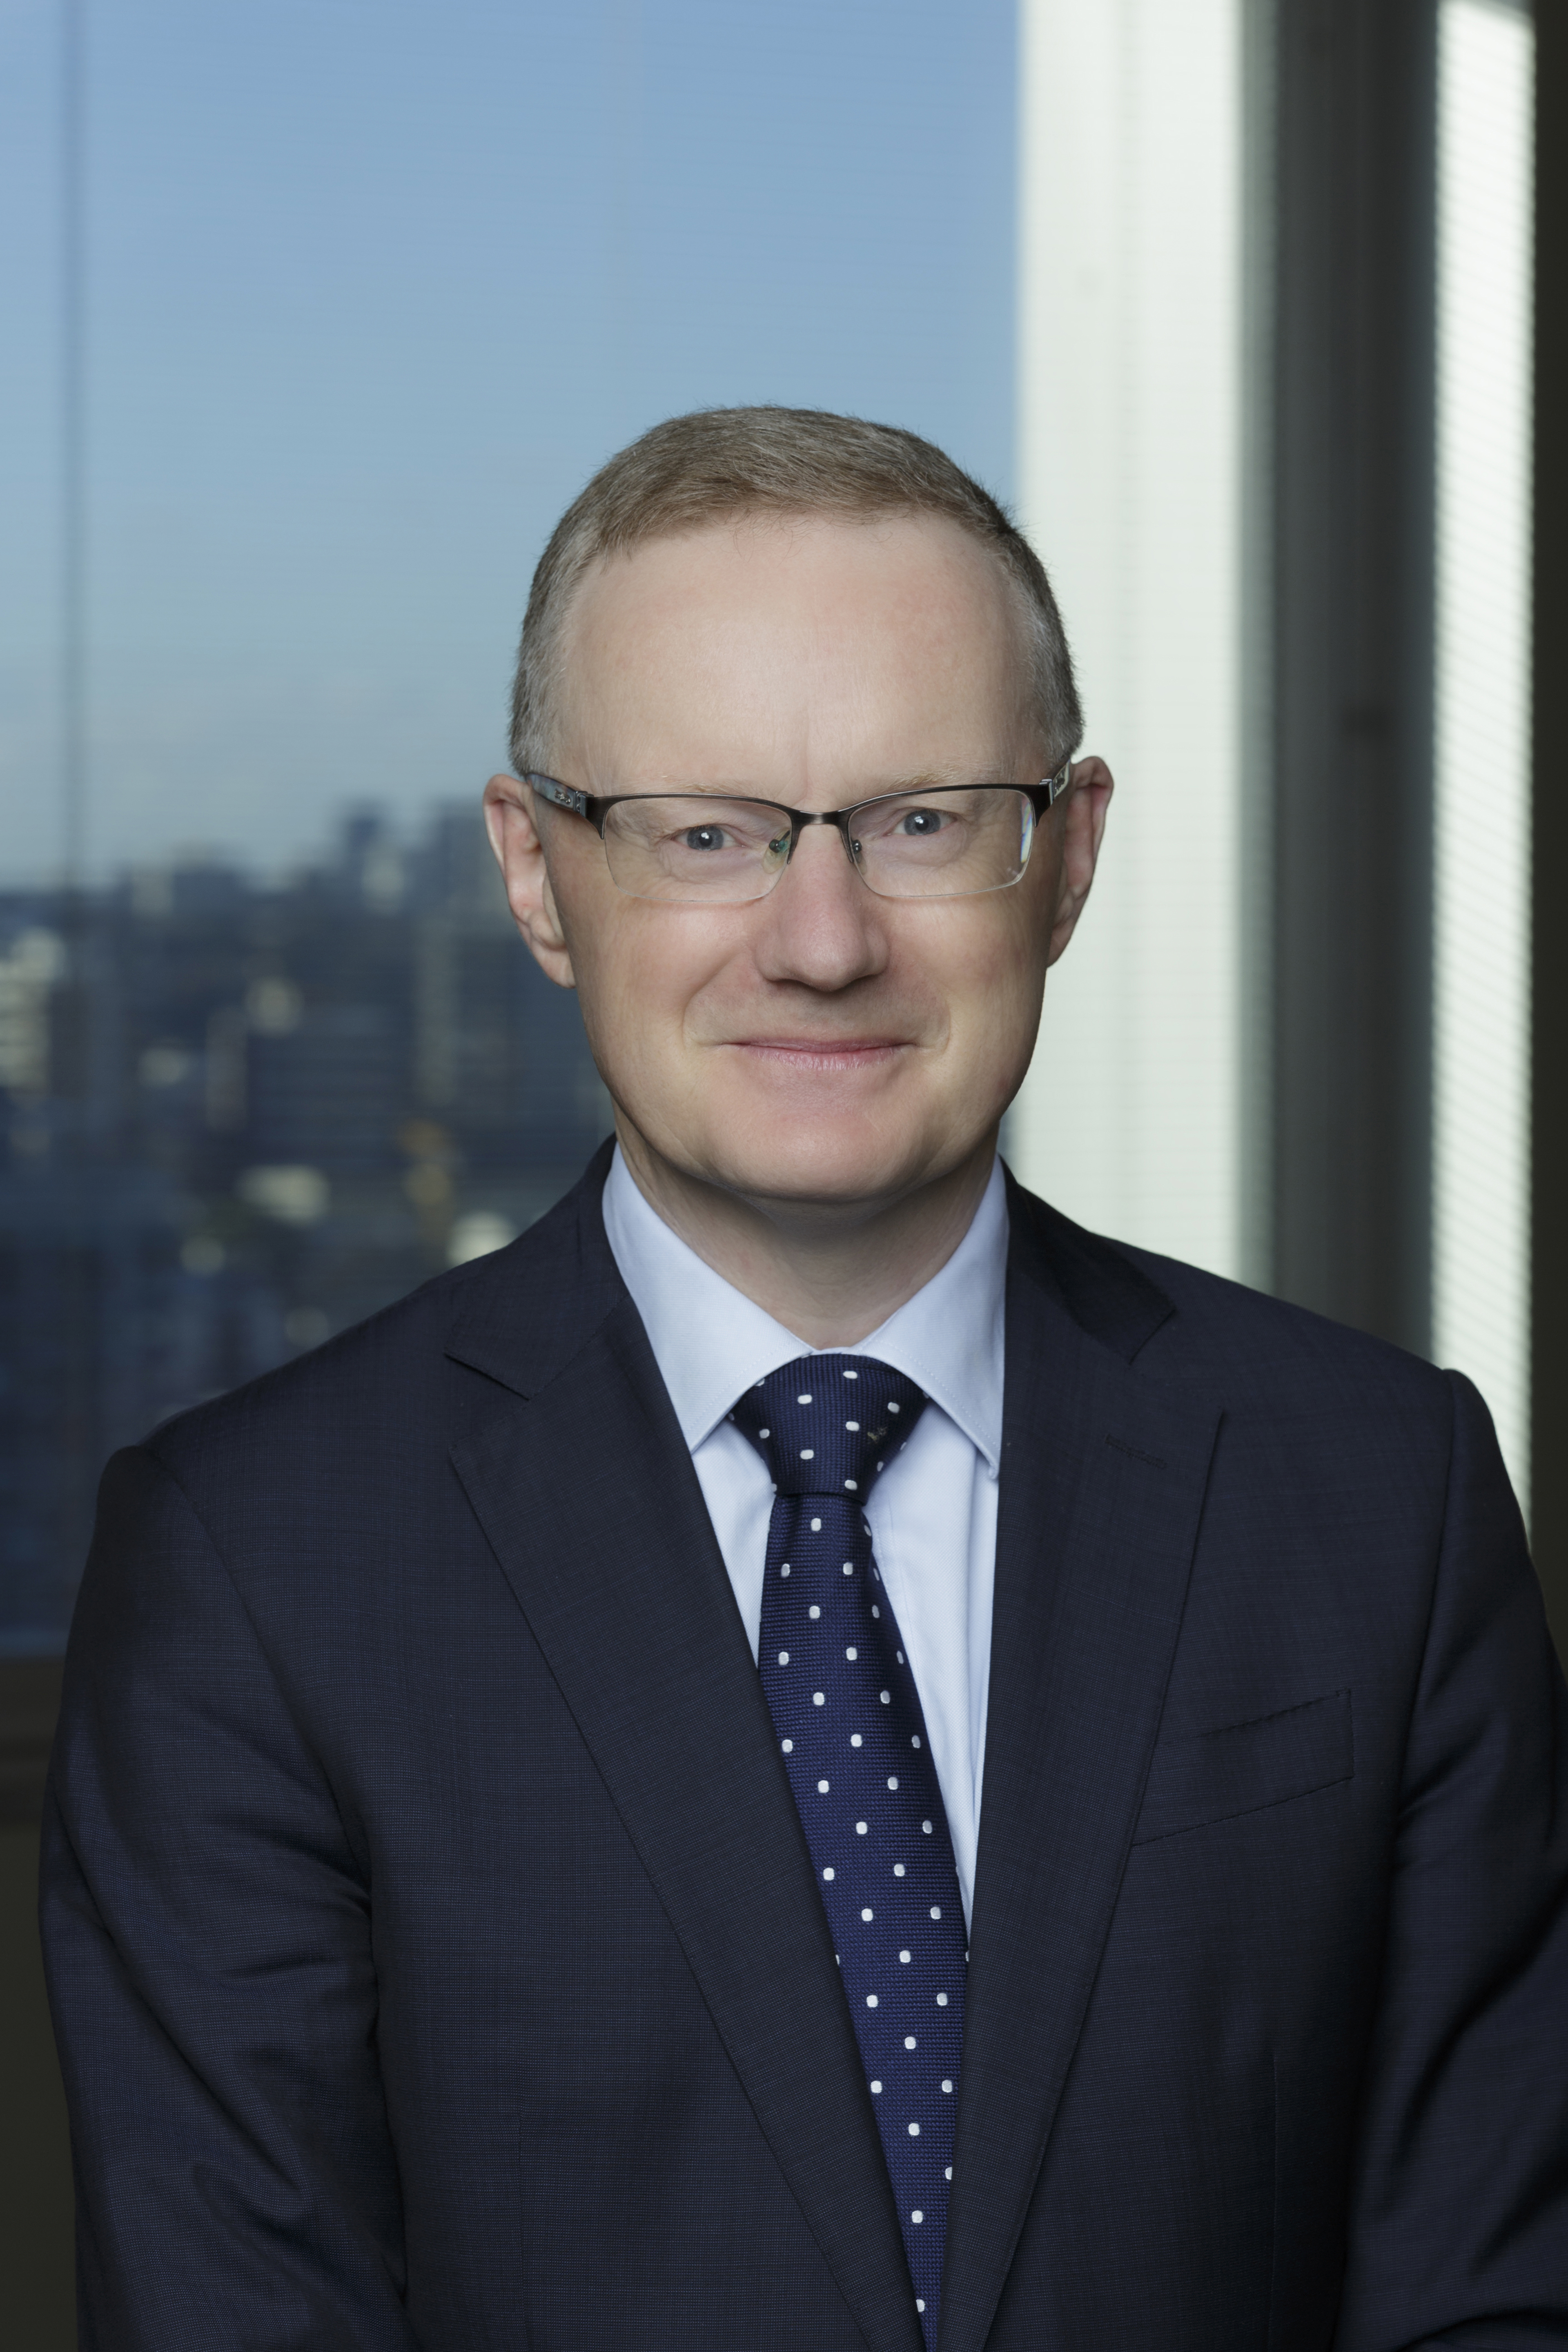 Housing supply needs to be more flexible: RBA governor